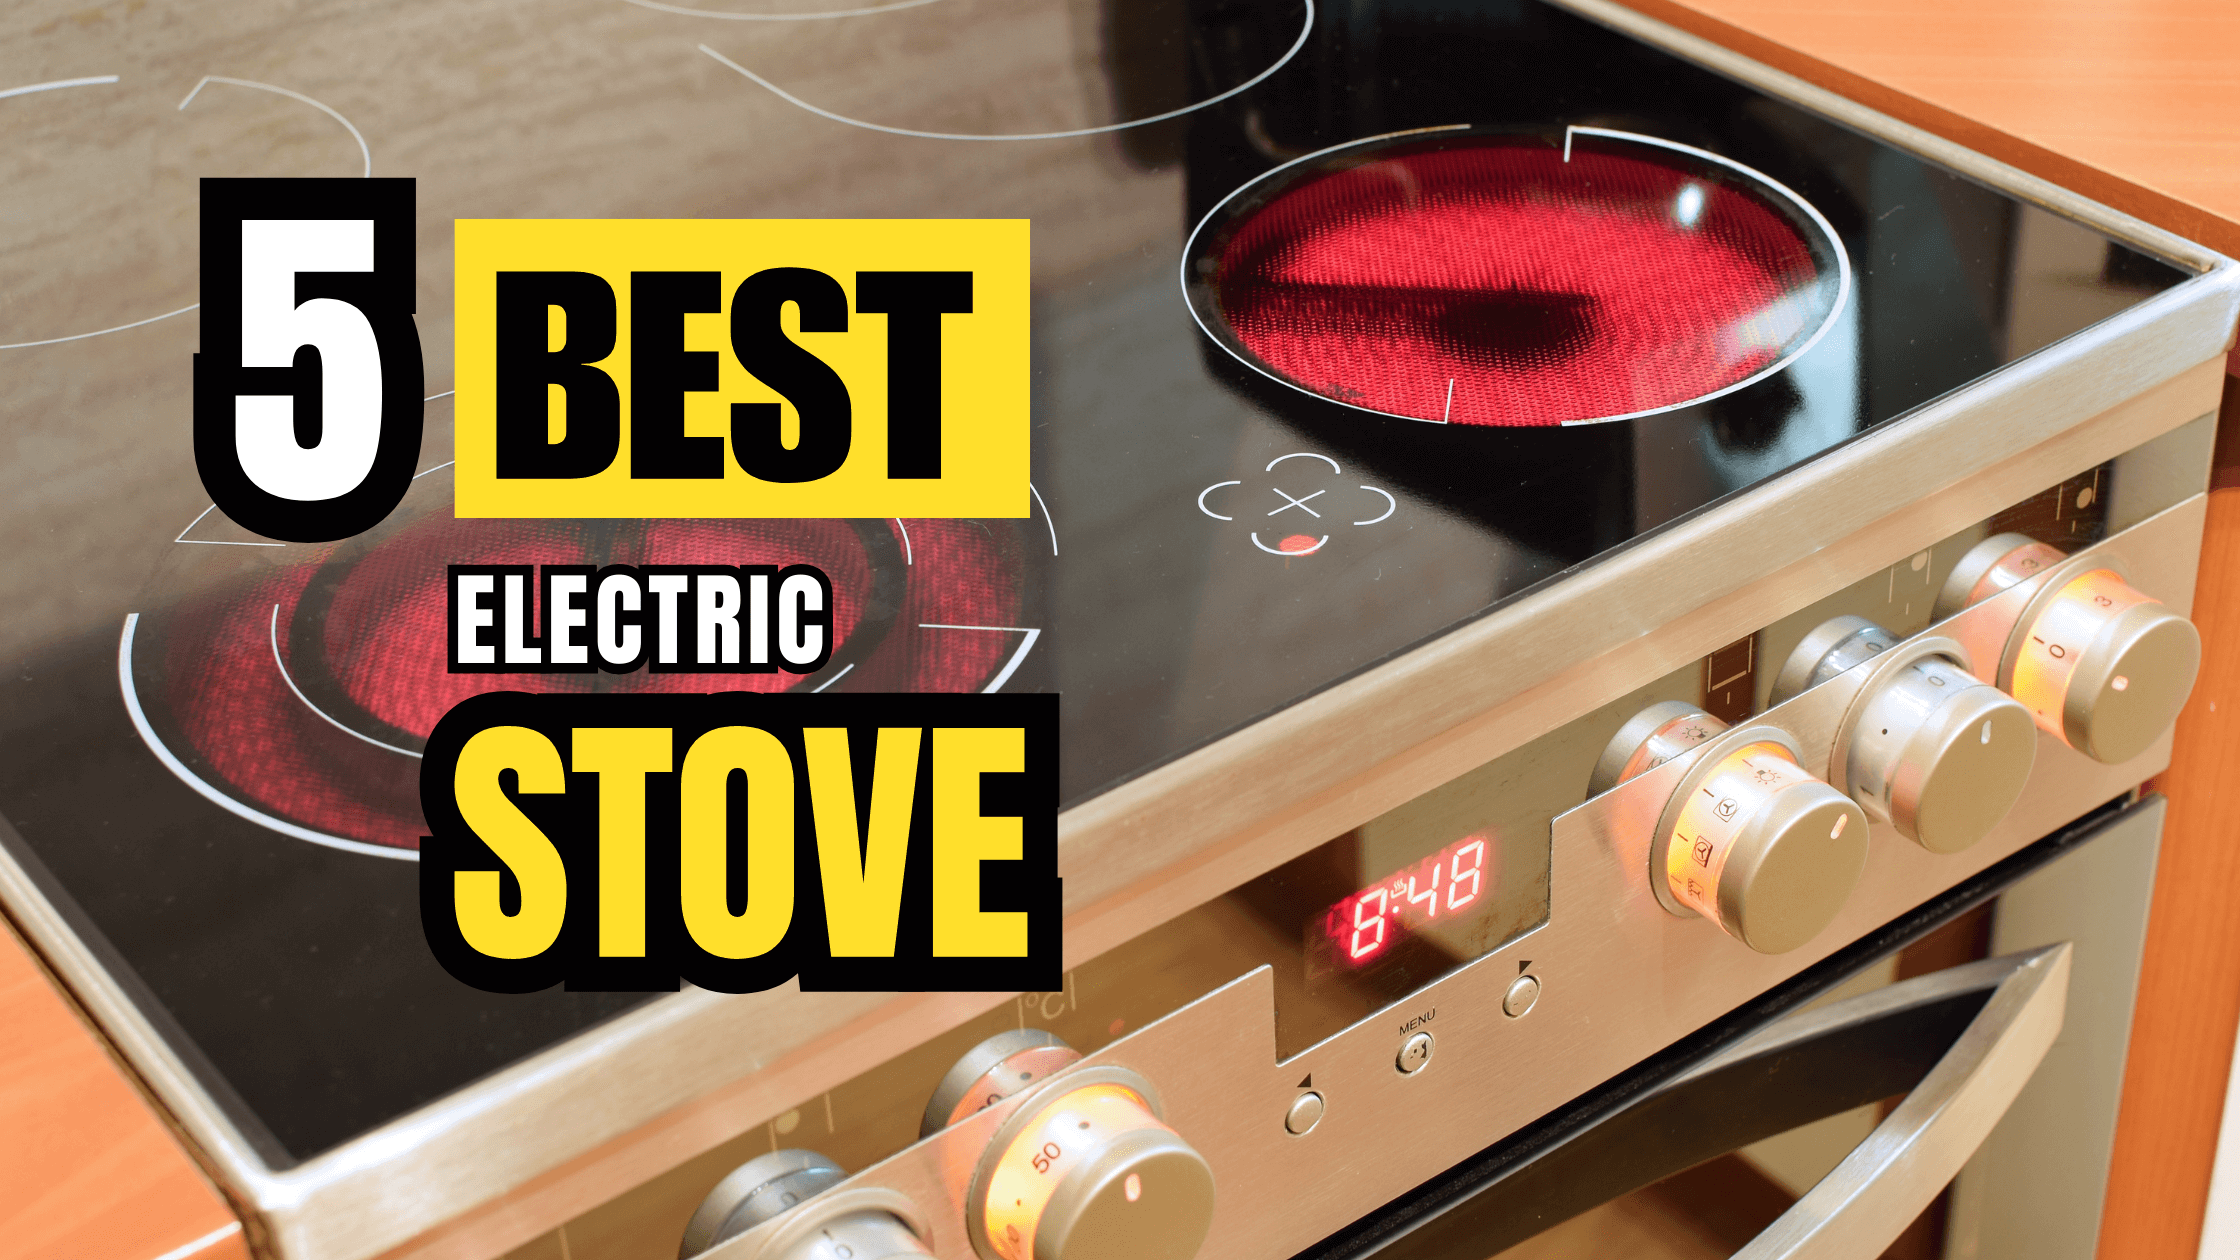 5 best electric stove